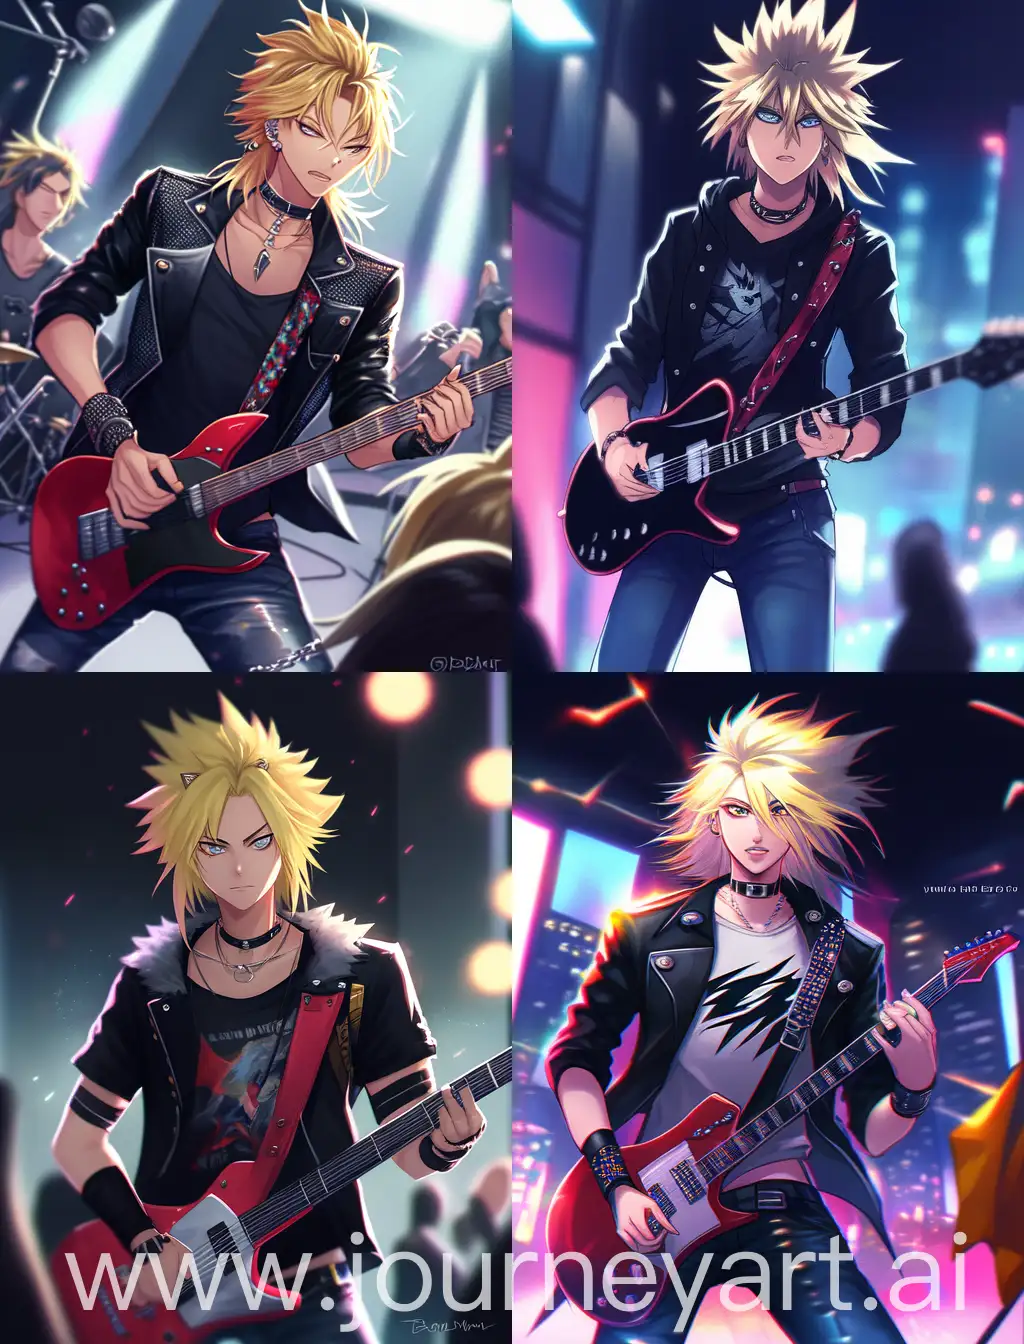 masterpiece, best quality, 1boy,  blond neck-length hair, guitarist, serious expression, punk outfit, black jacket, long ripped jeans, pierced ears, metal necklace, rock band t-shirt, holding electric guitar, modern, night,